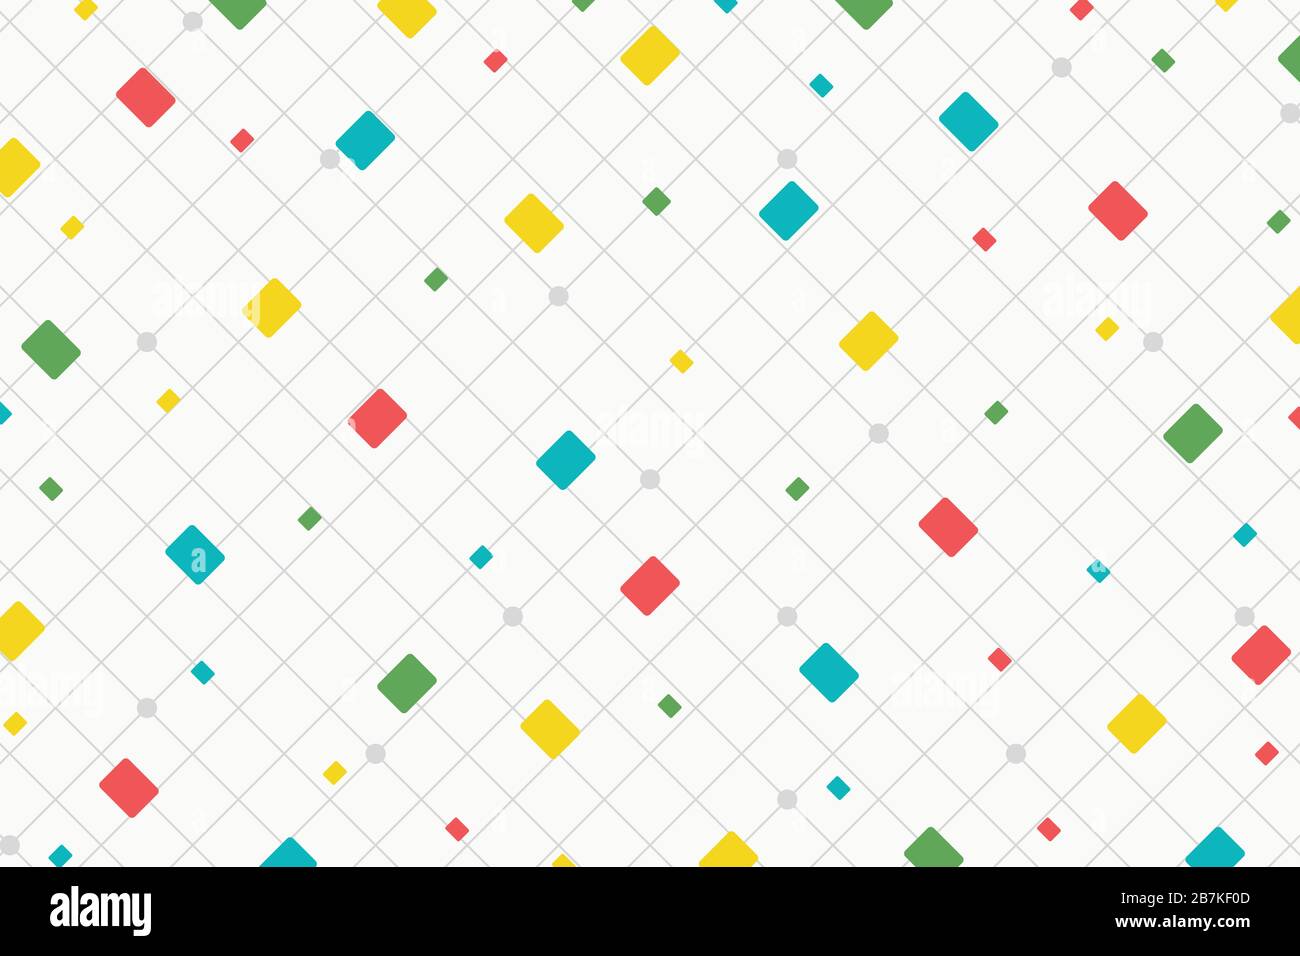 Abstract square pattern of colorful tech design artwork background. Use for ad, poster, artwork, template design, print. illustration vector eps10 Stock Vector